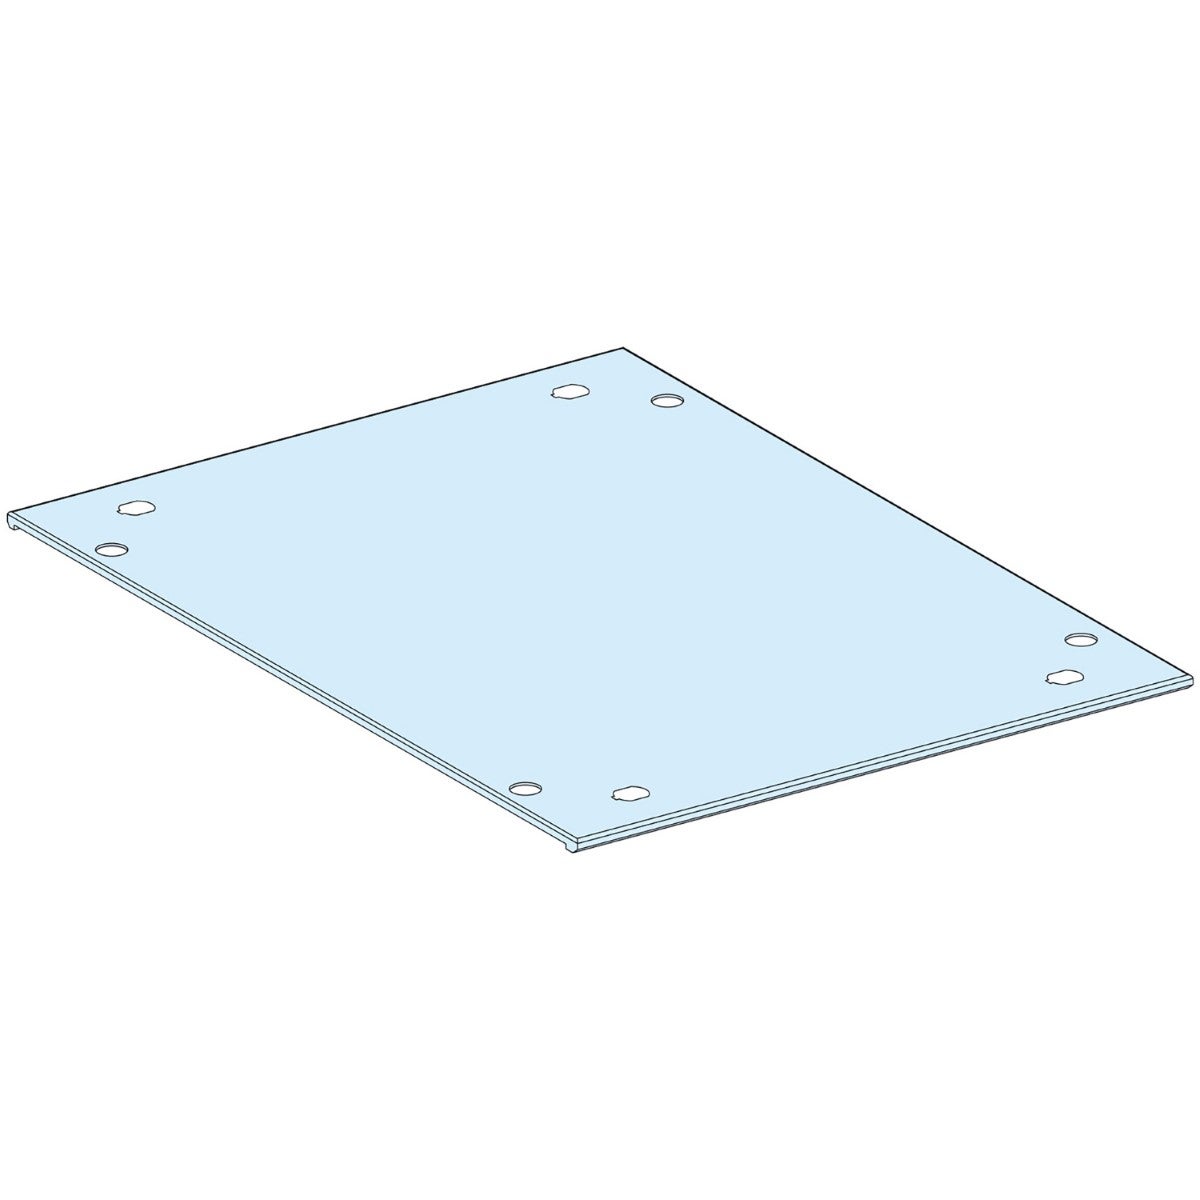 Roof plate, PrismaSeT P, for enclosure, W400mm, D600mm, IP30, white, RAL 9003